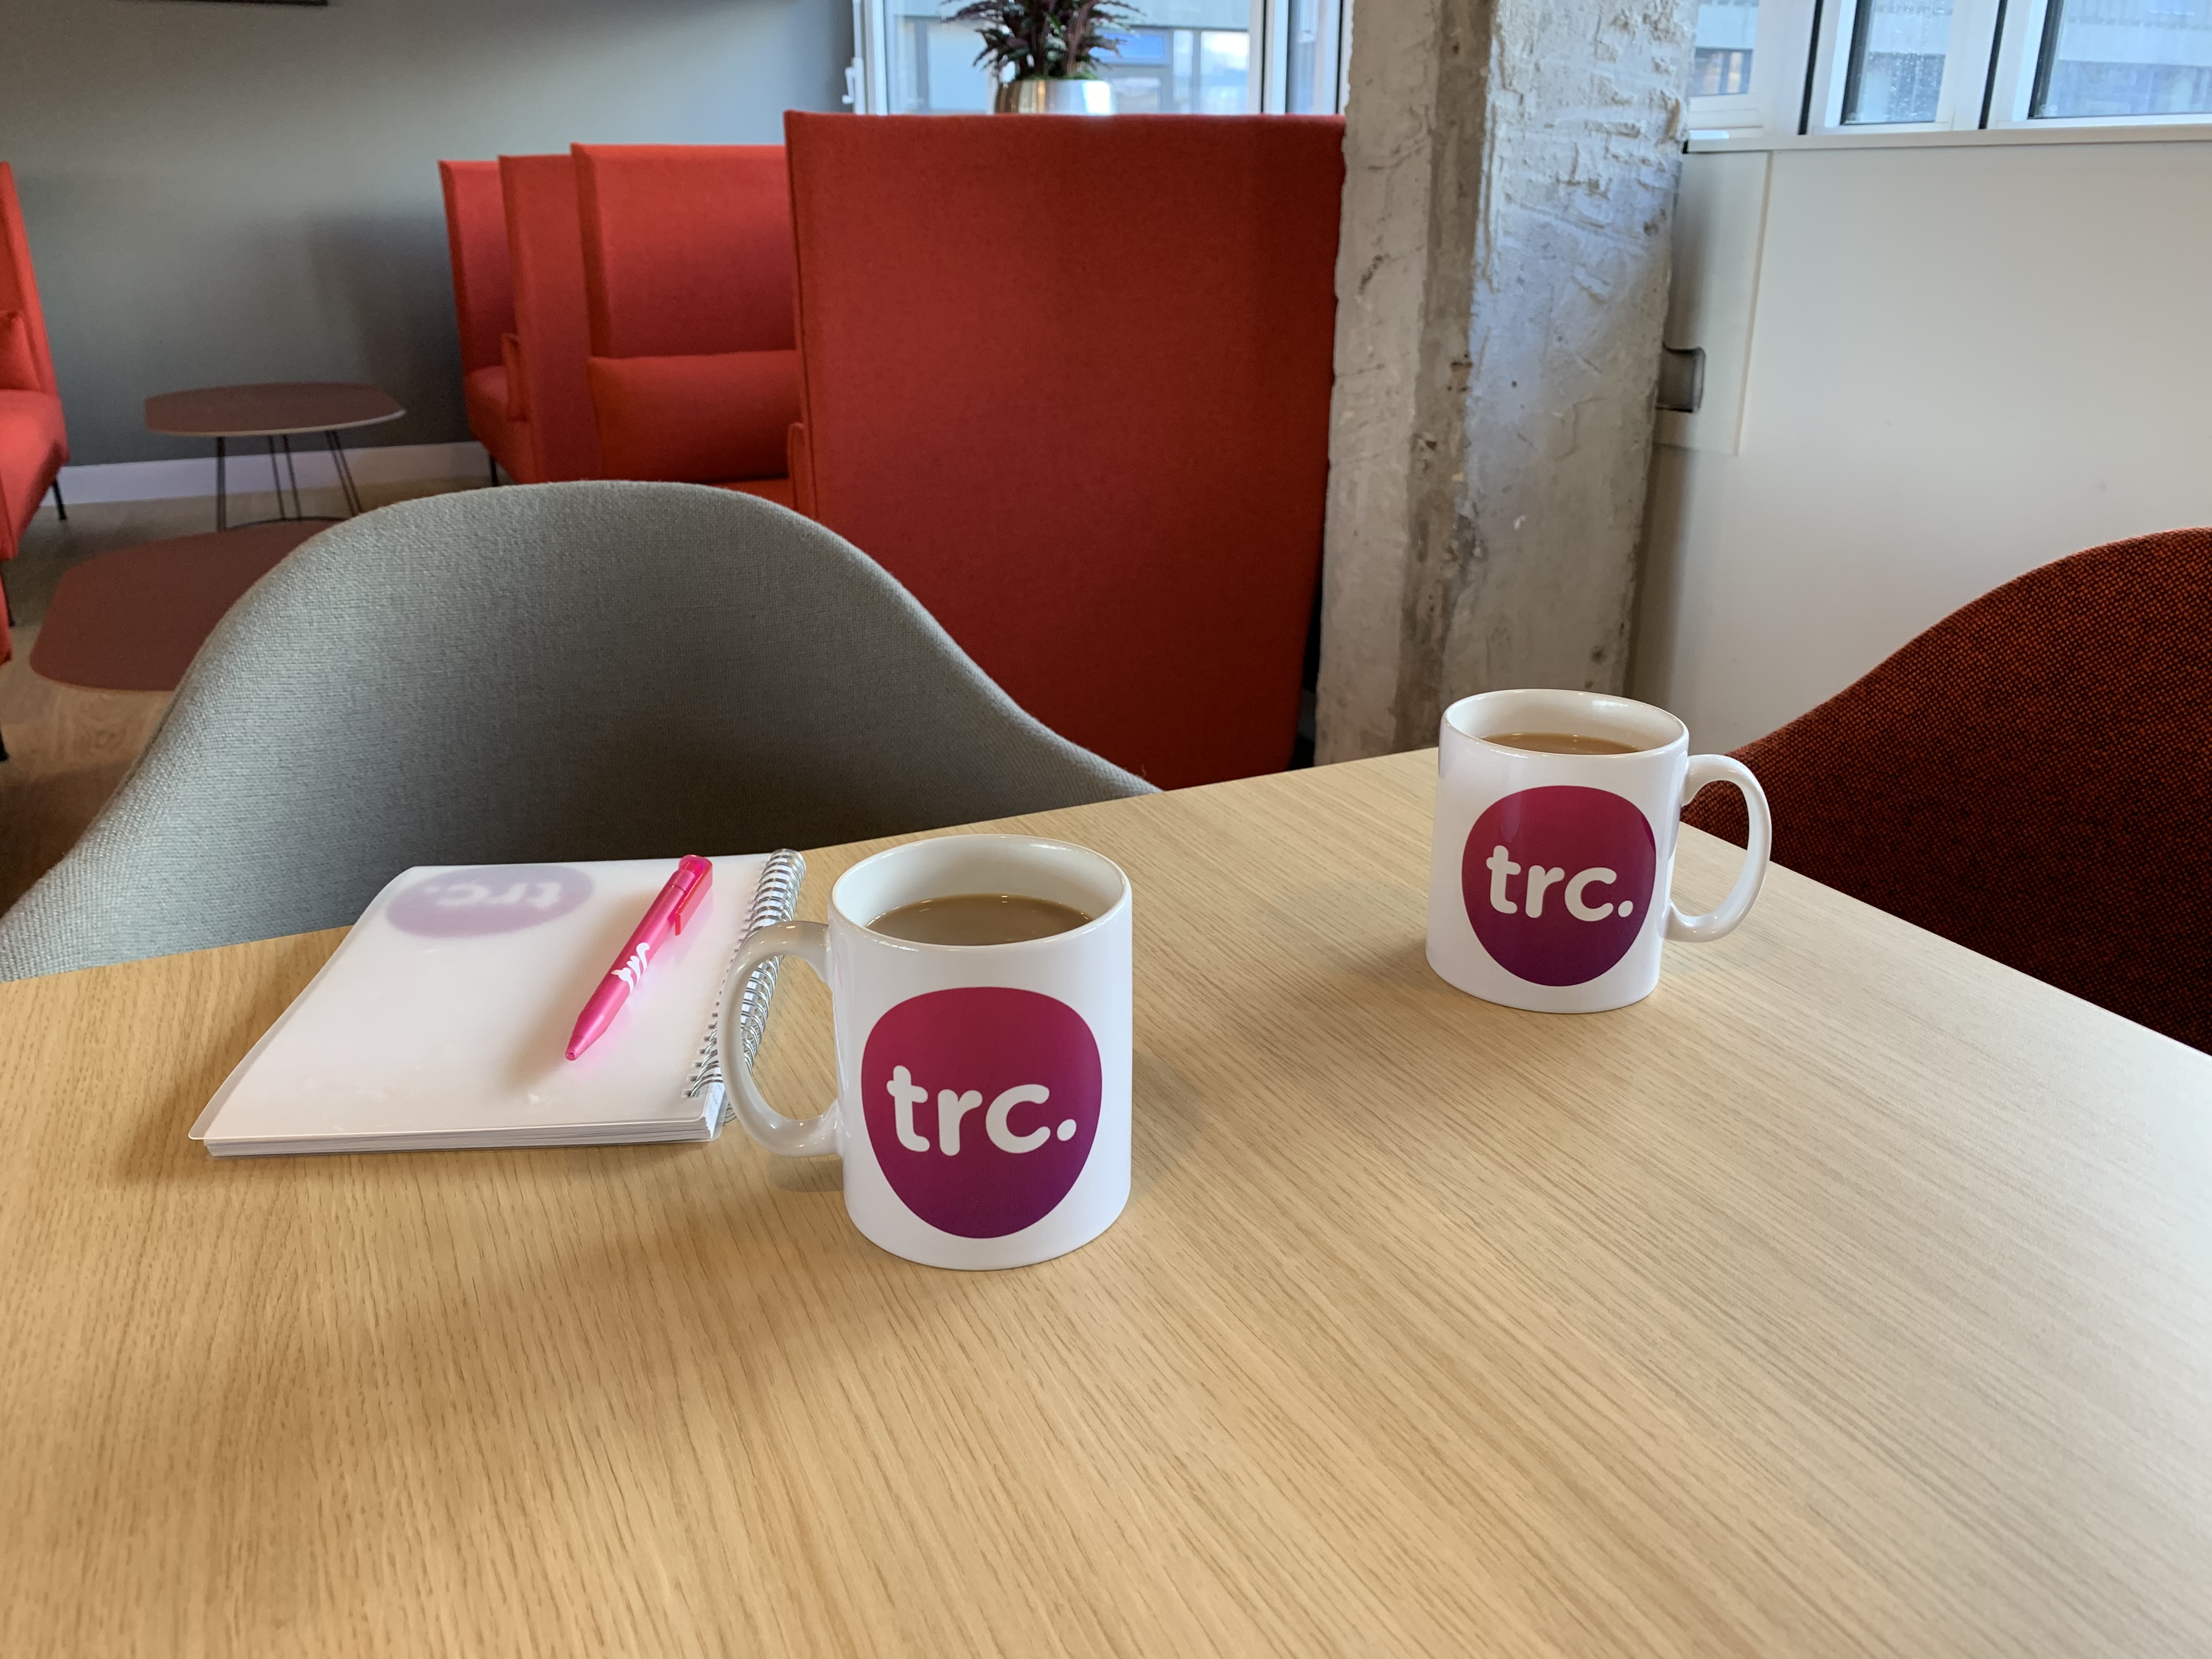 Team TRC is working from home